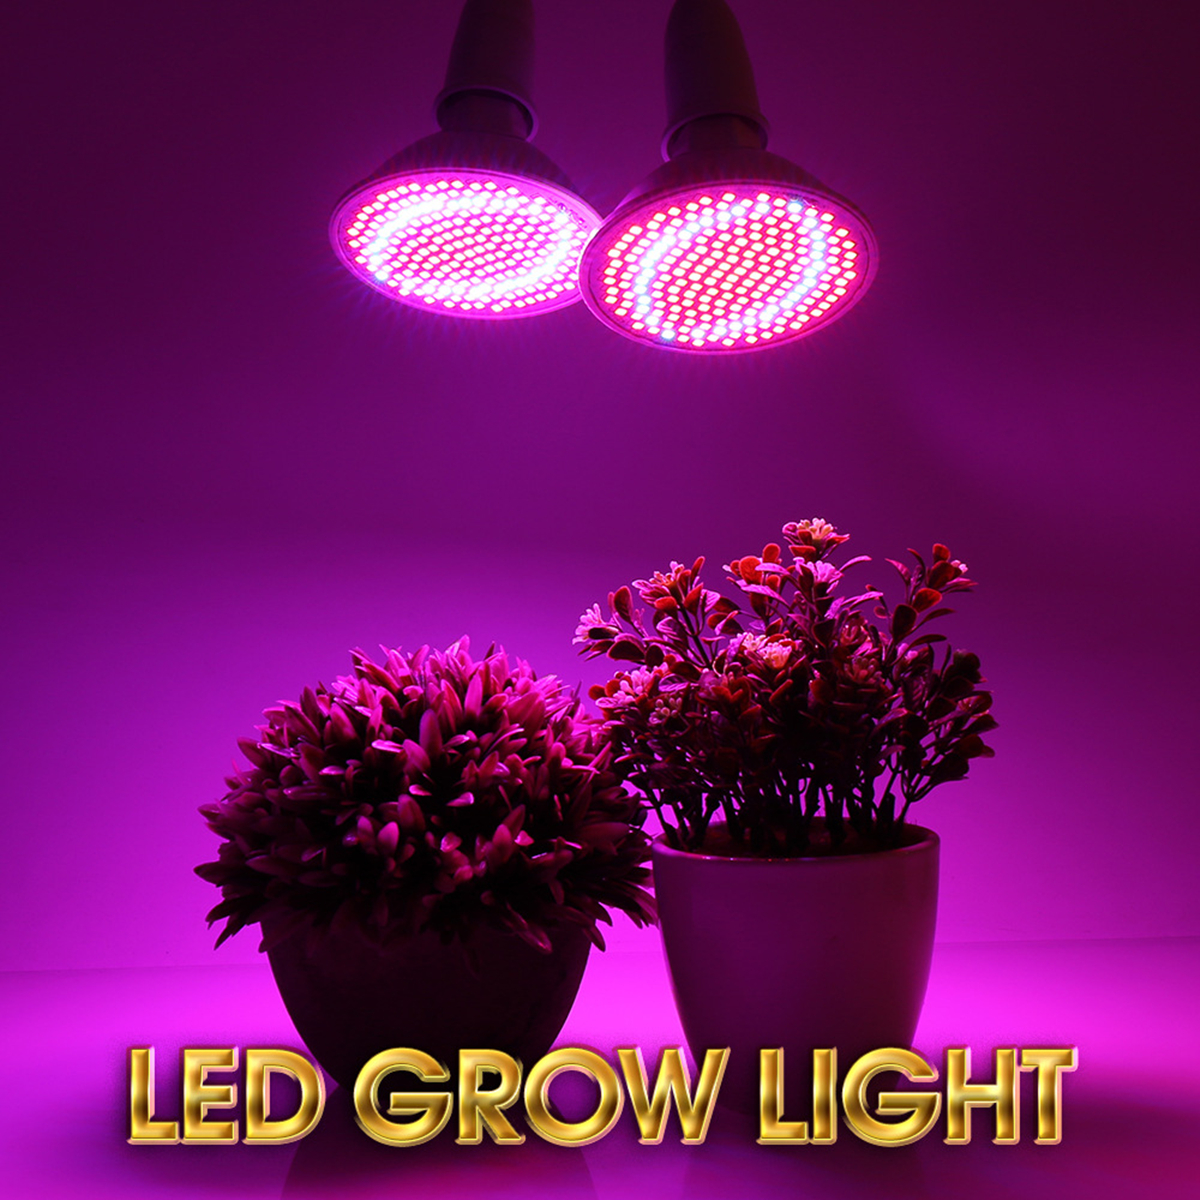 Dual-Heads-20W-LED-Plant-Grow-Light-with-Lamp-Holder-Clip-For-Home-Indoor-Vegetable-Flowers-AC85-265-1723859-2